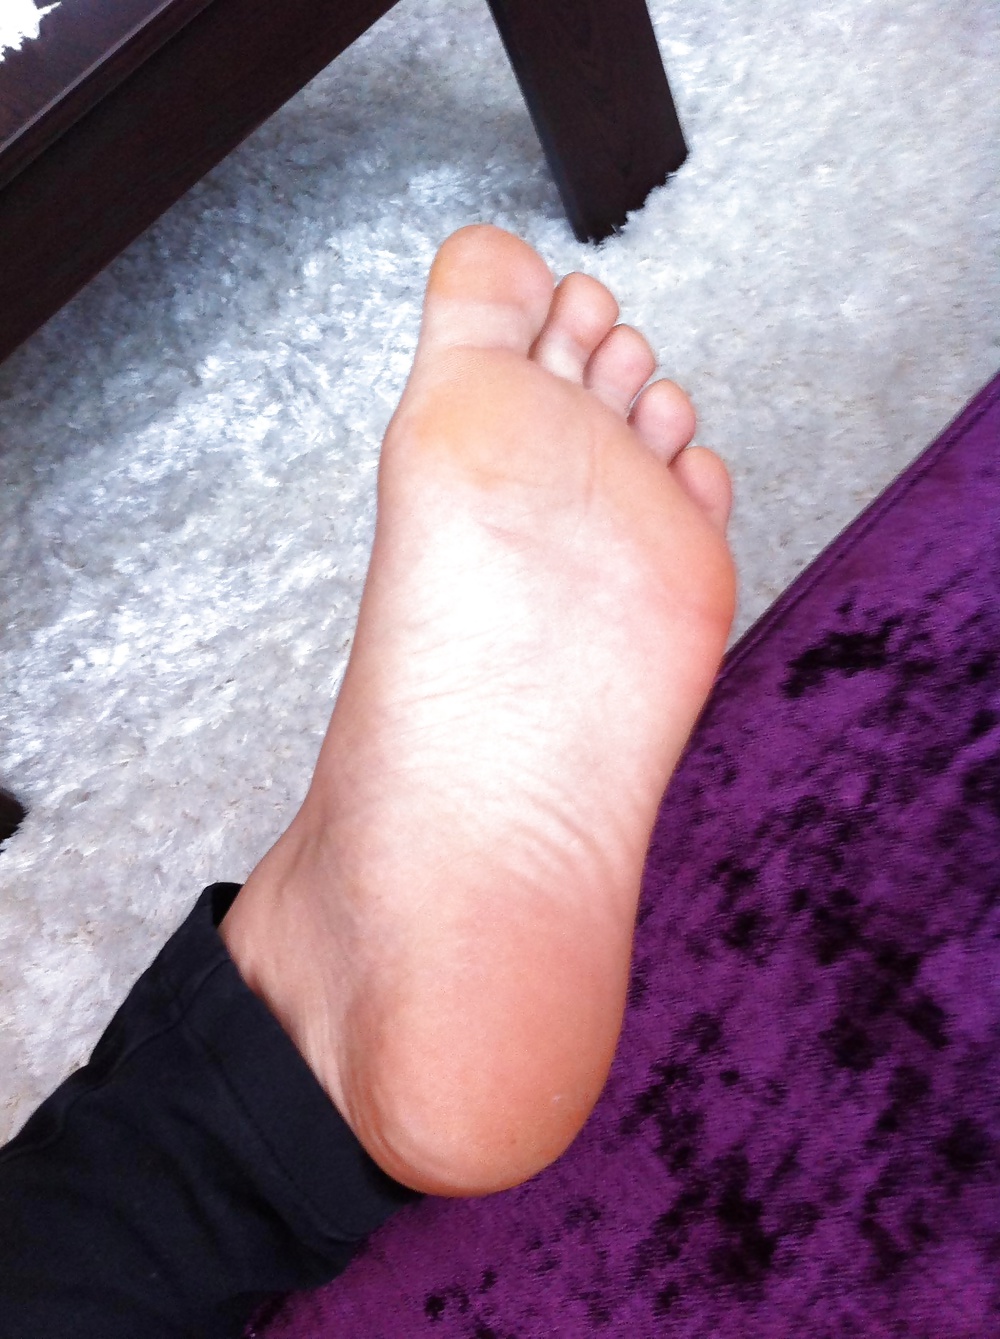 Turkish Milf Old Friend Feet Foot Toes Soles Ayak Taban Porn Pictures